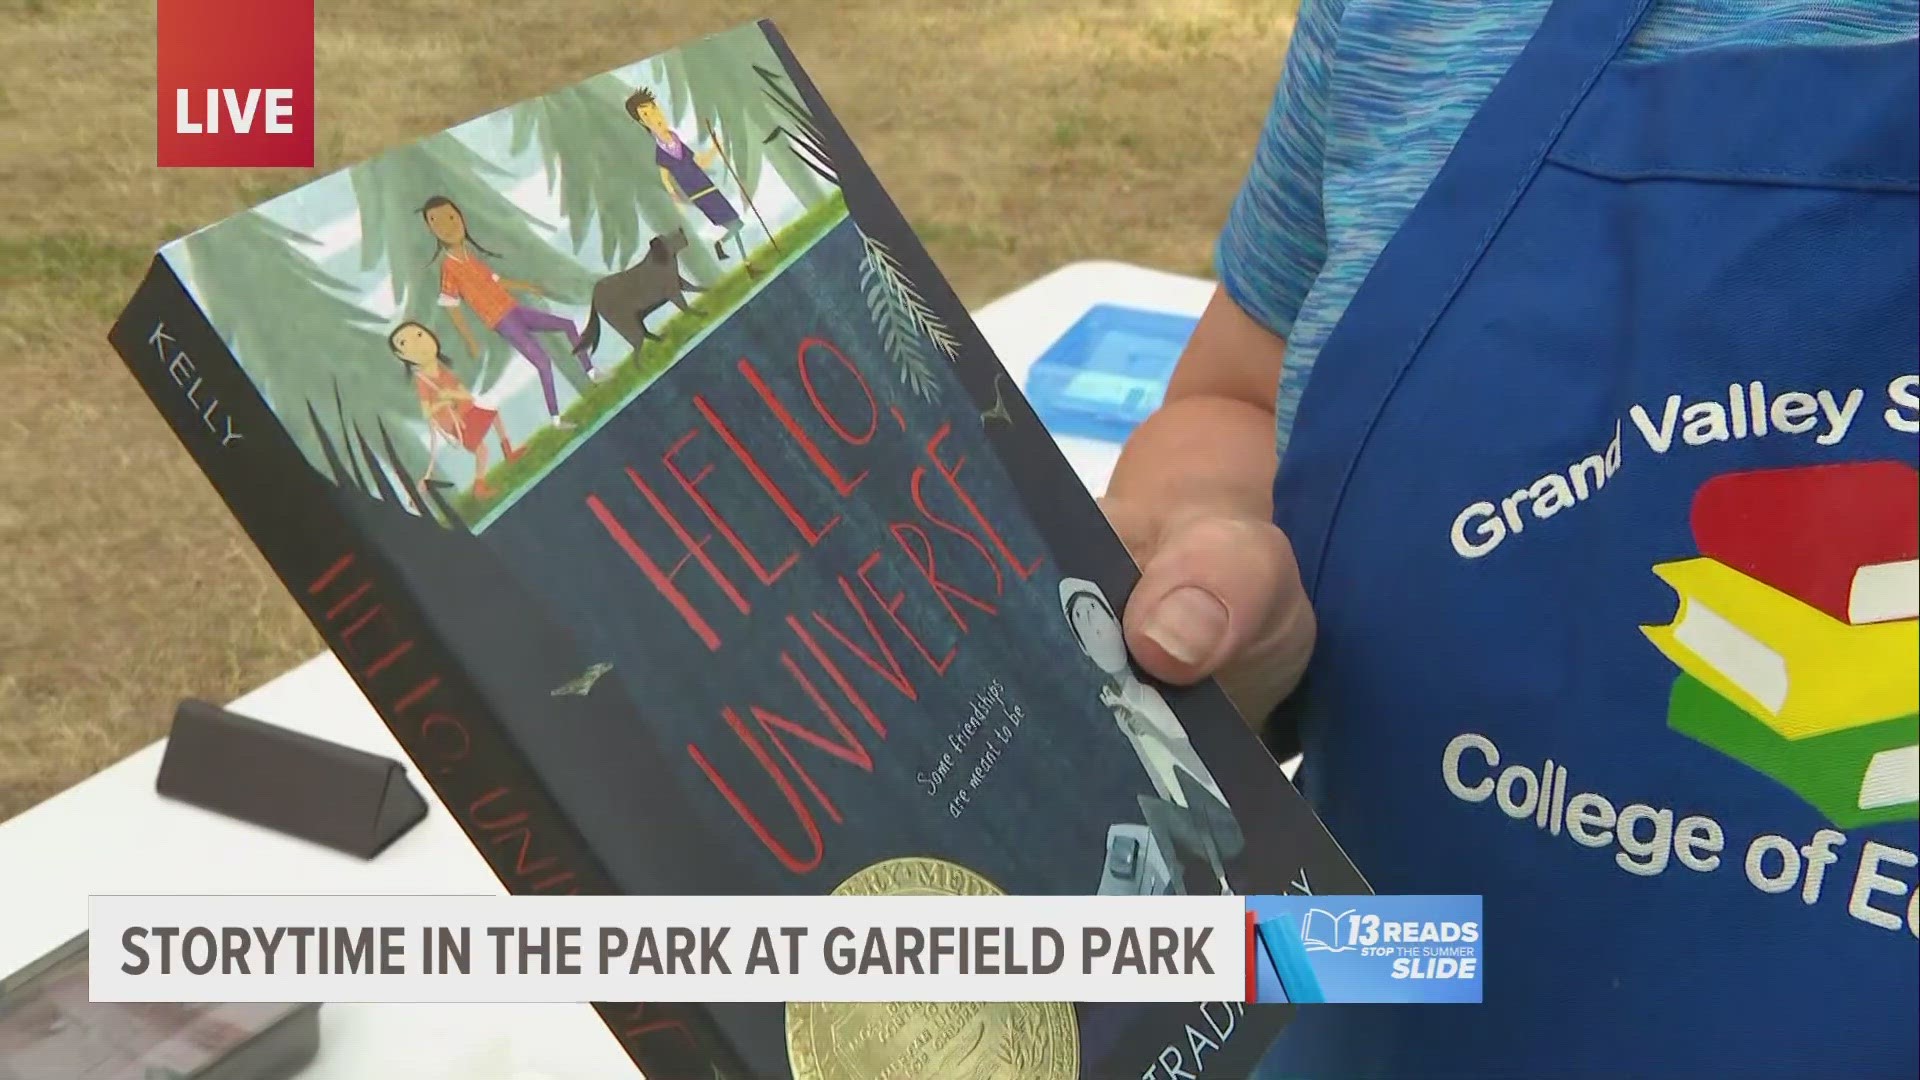 Come with your kids and enjoy Storytime in the Park at Garfield Park tonight from 6:30 - 8 p.m.